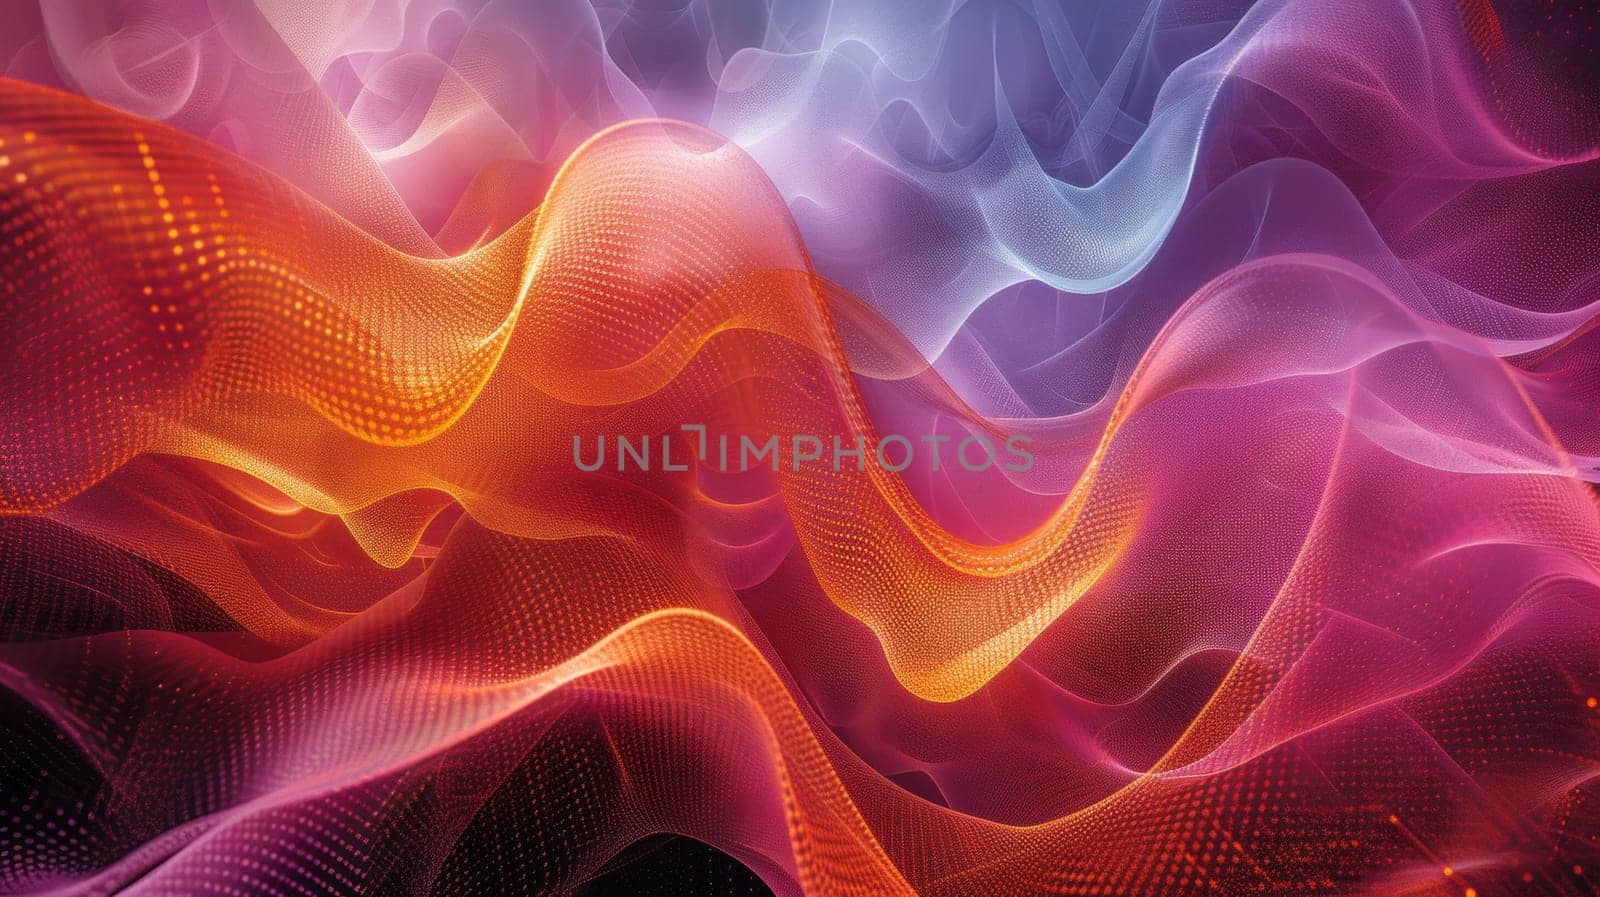 A close up of a colorful abstract design with wavy lines